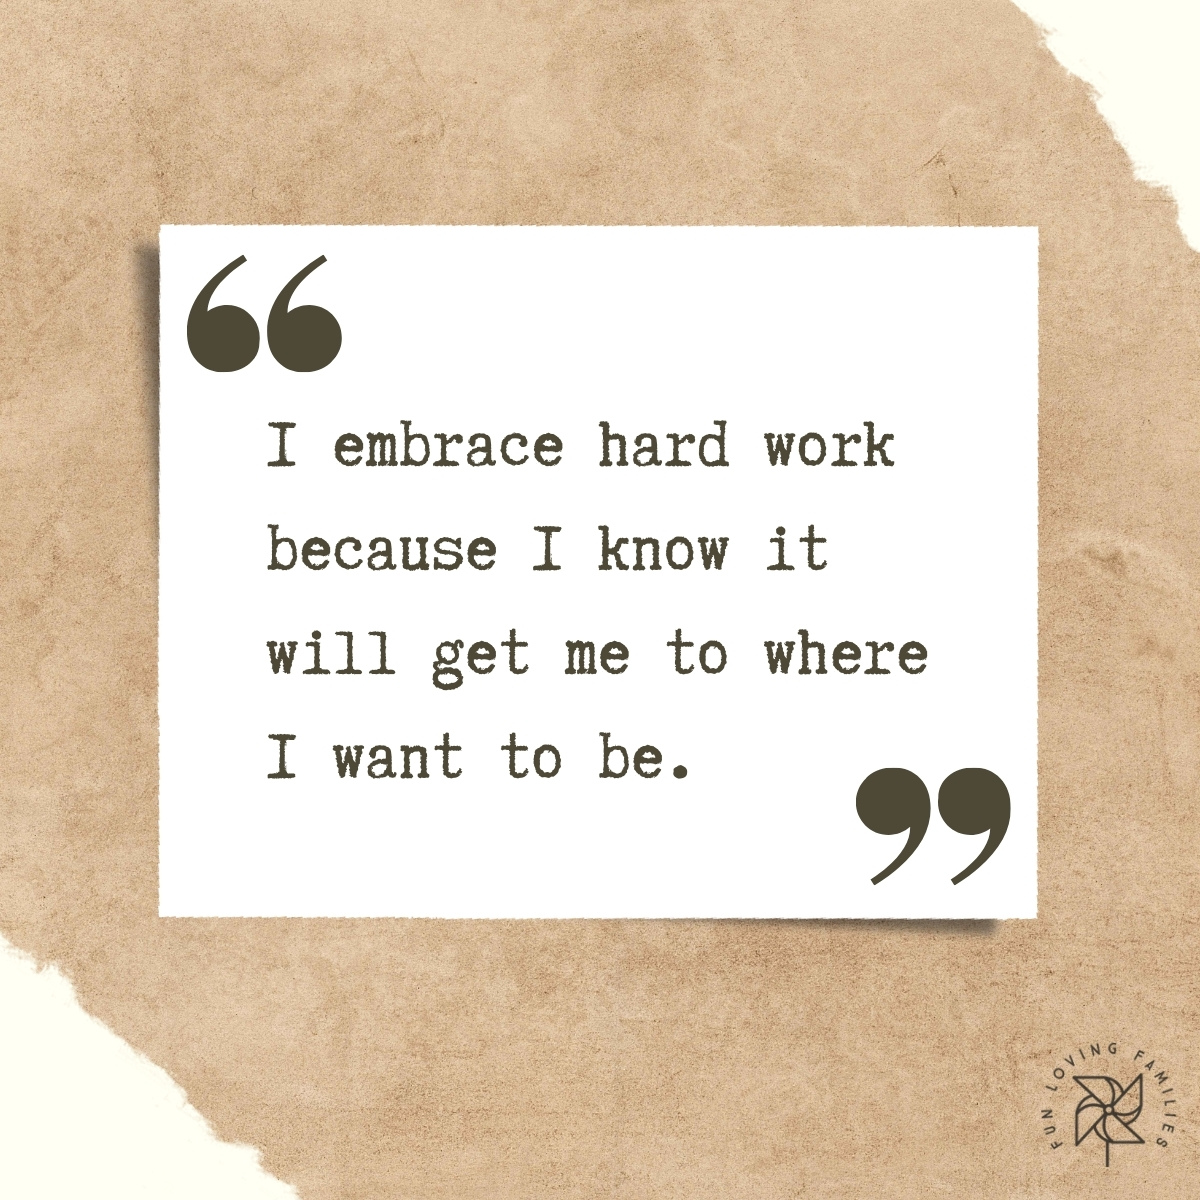 I embrace hard work because I know it will get me to where I want to be affirmation